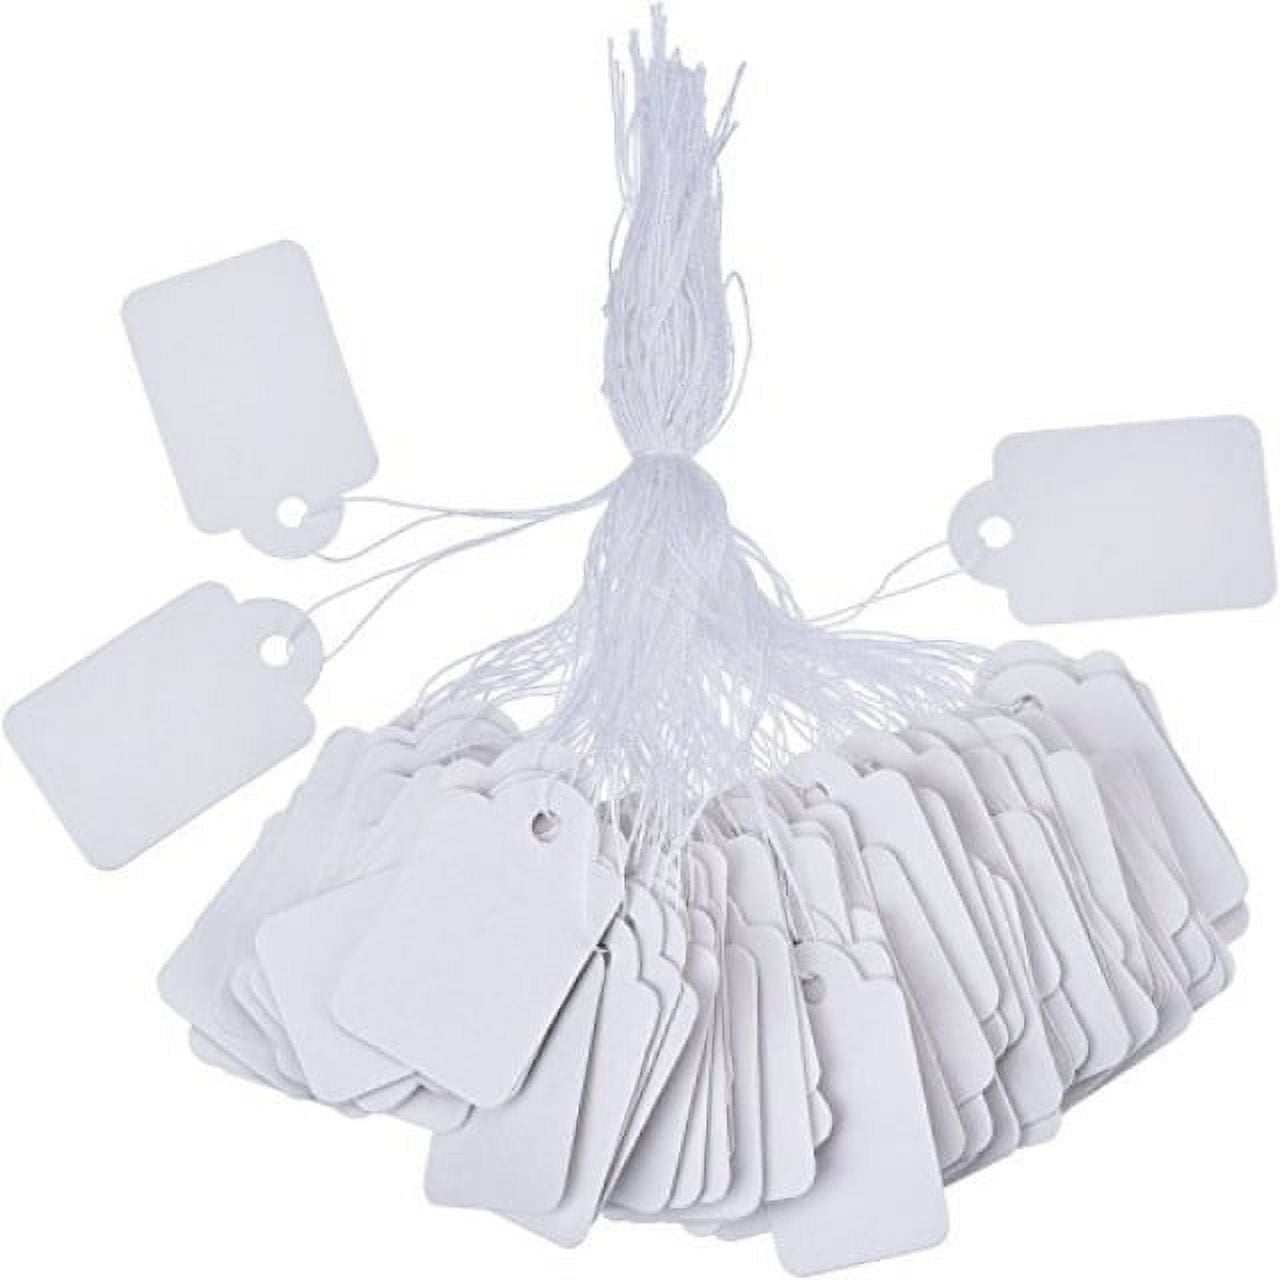 Outus White Marking Tags Price Tags Price Labels Display Tags with Hanging String 500 Pack (35 x 22 mm)